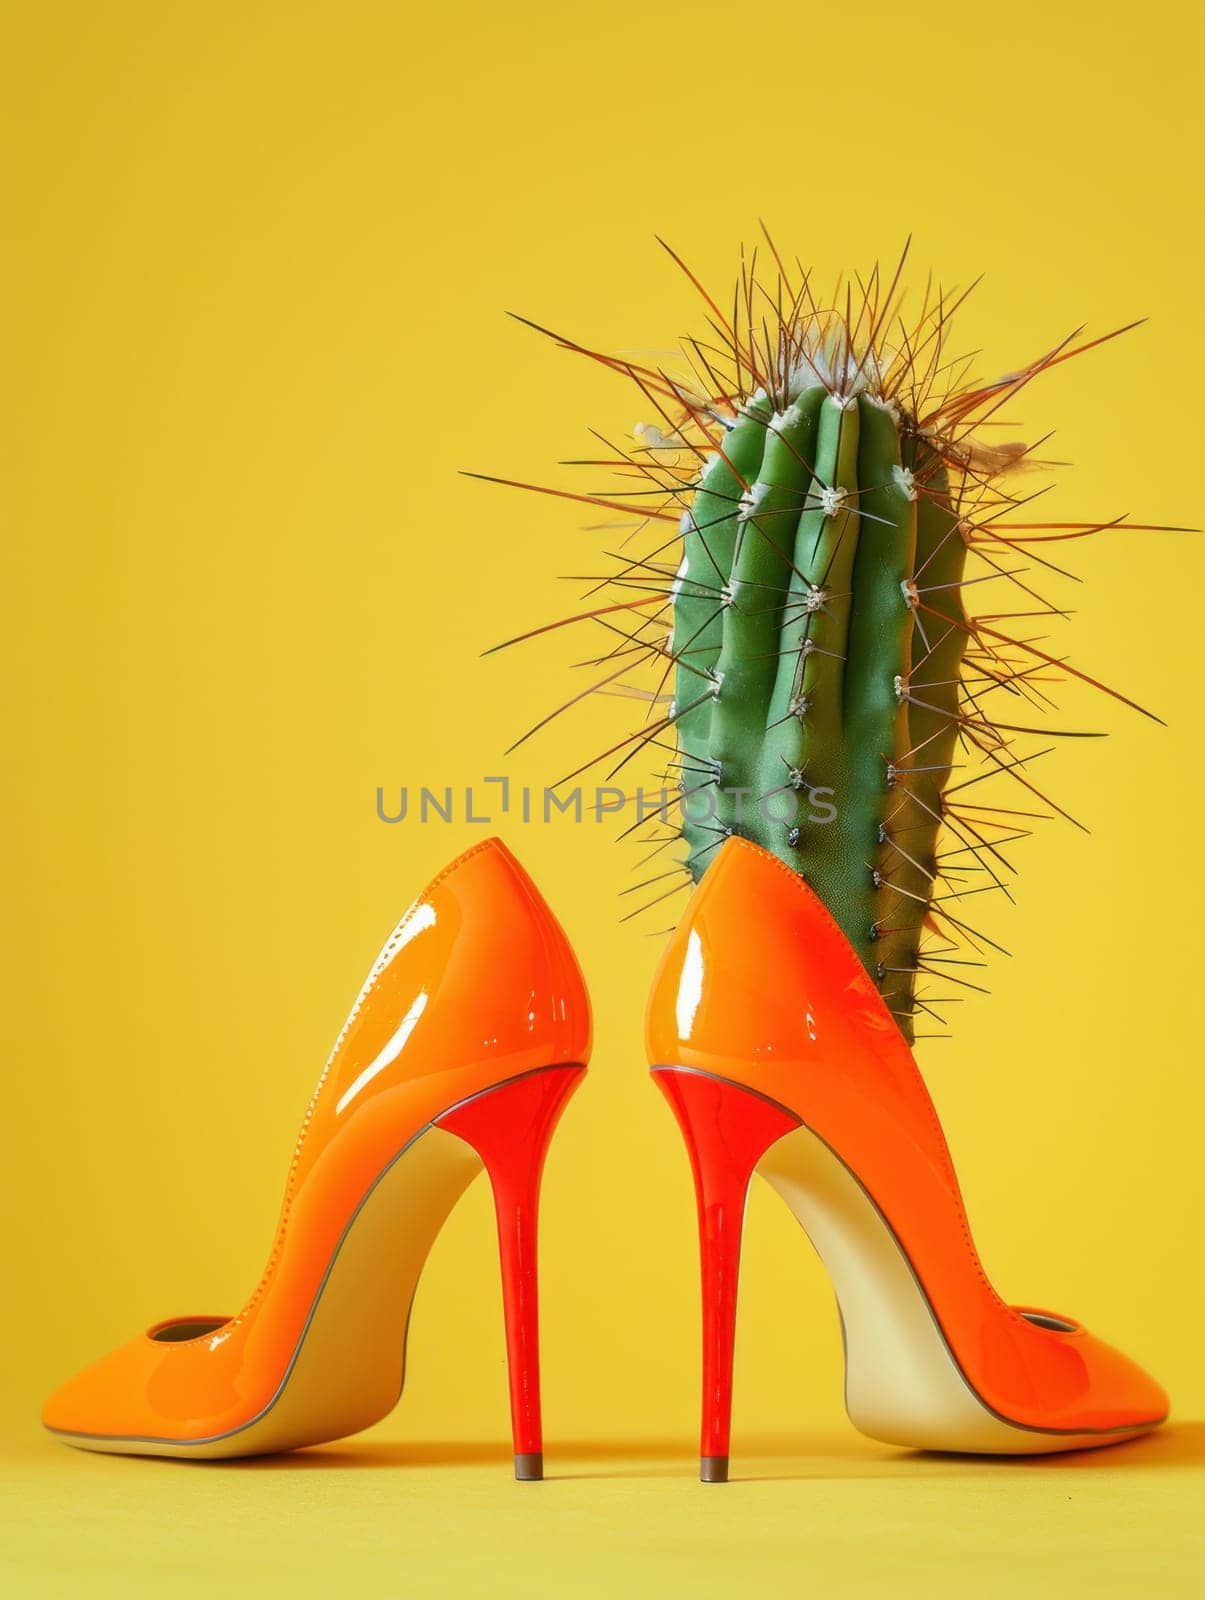 Stylish high heeled shoes with cactus on yellow background fashion and nature contrast in accessory trend